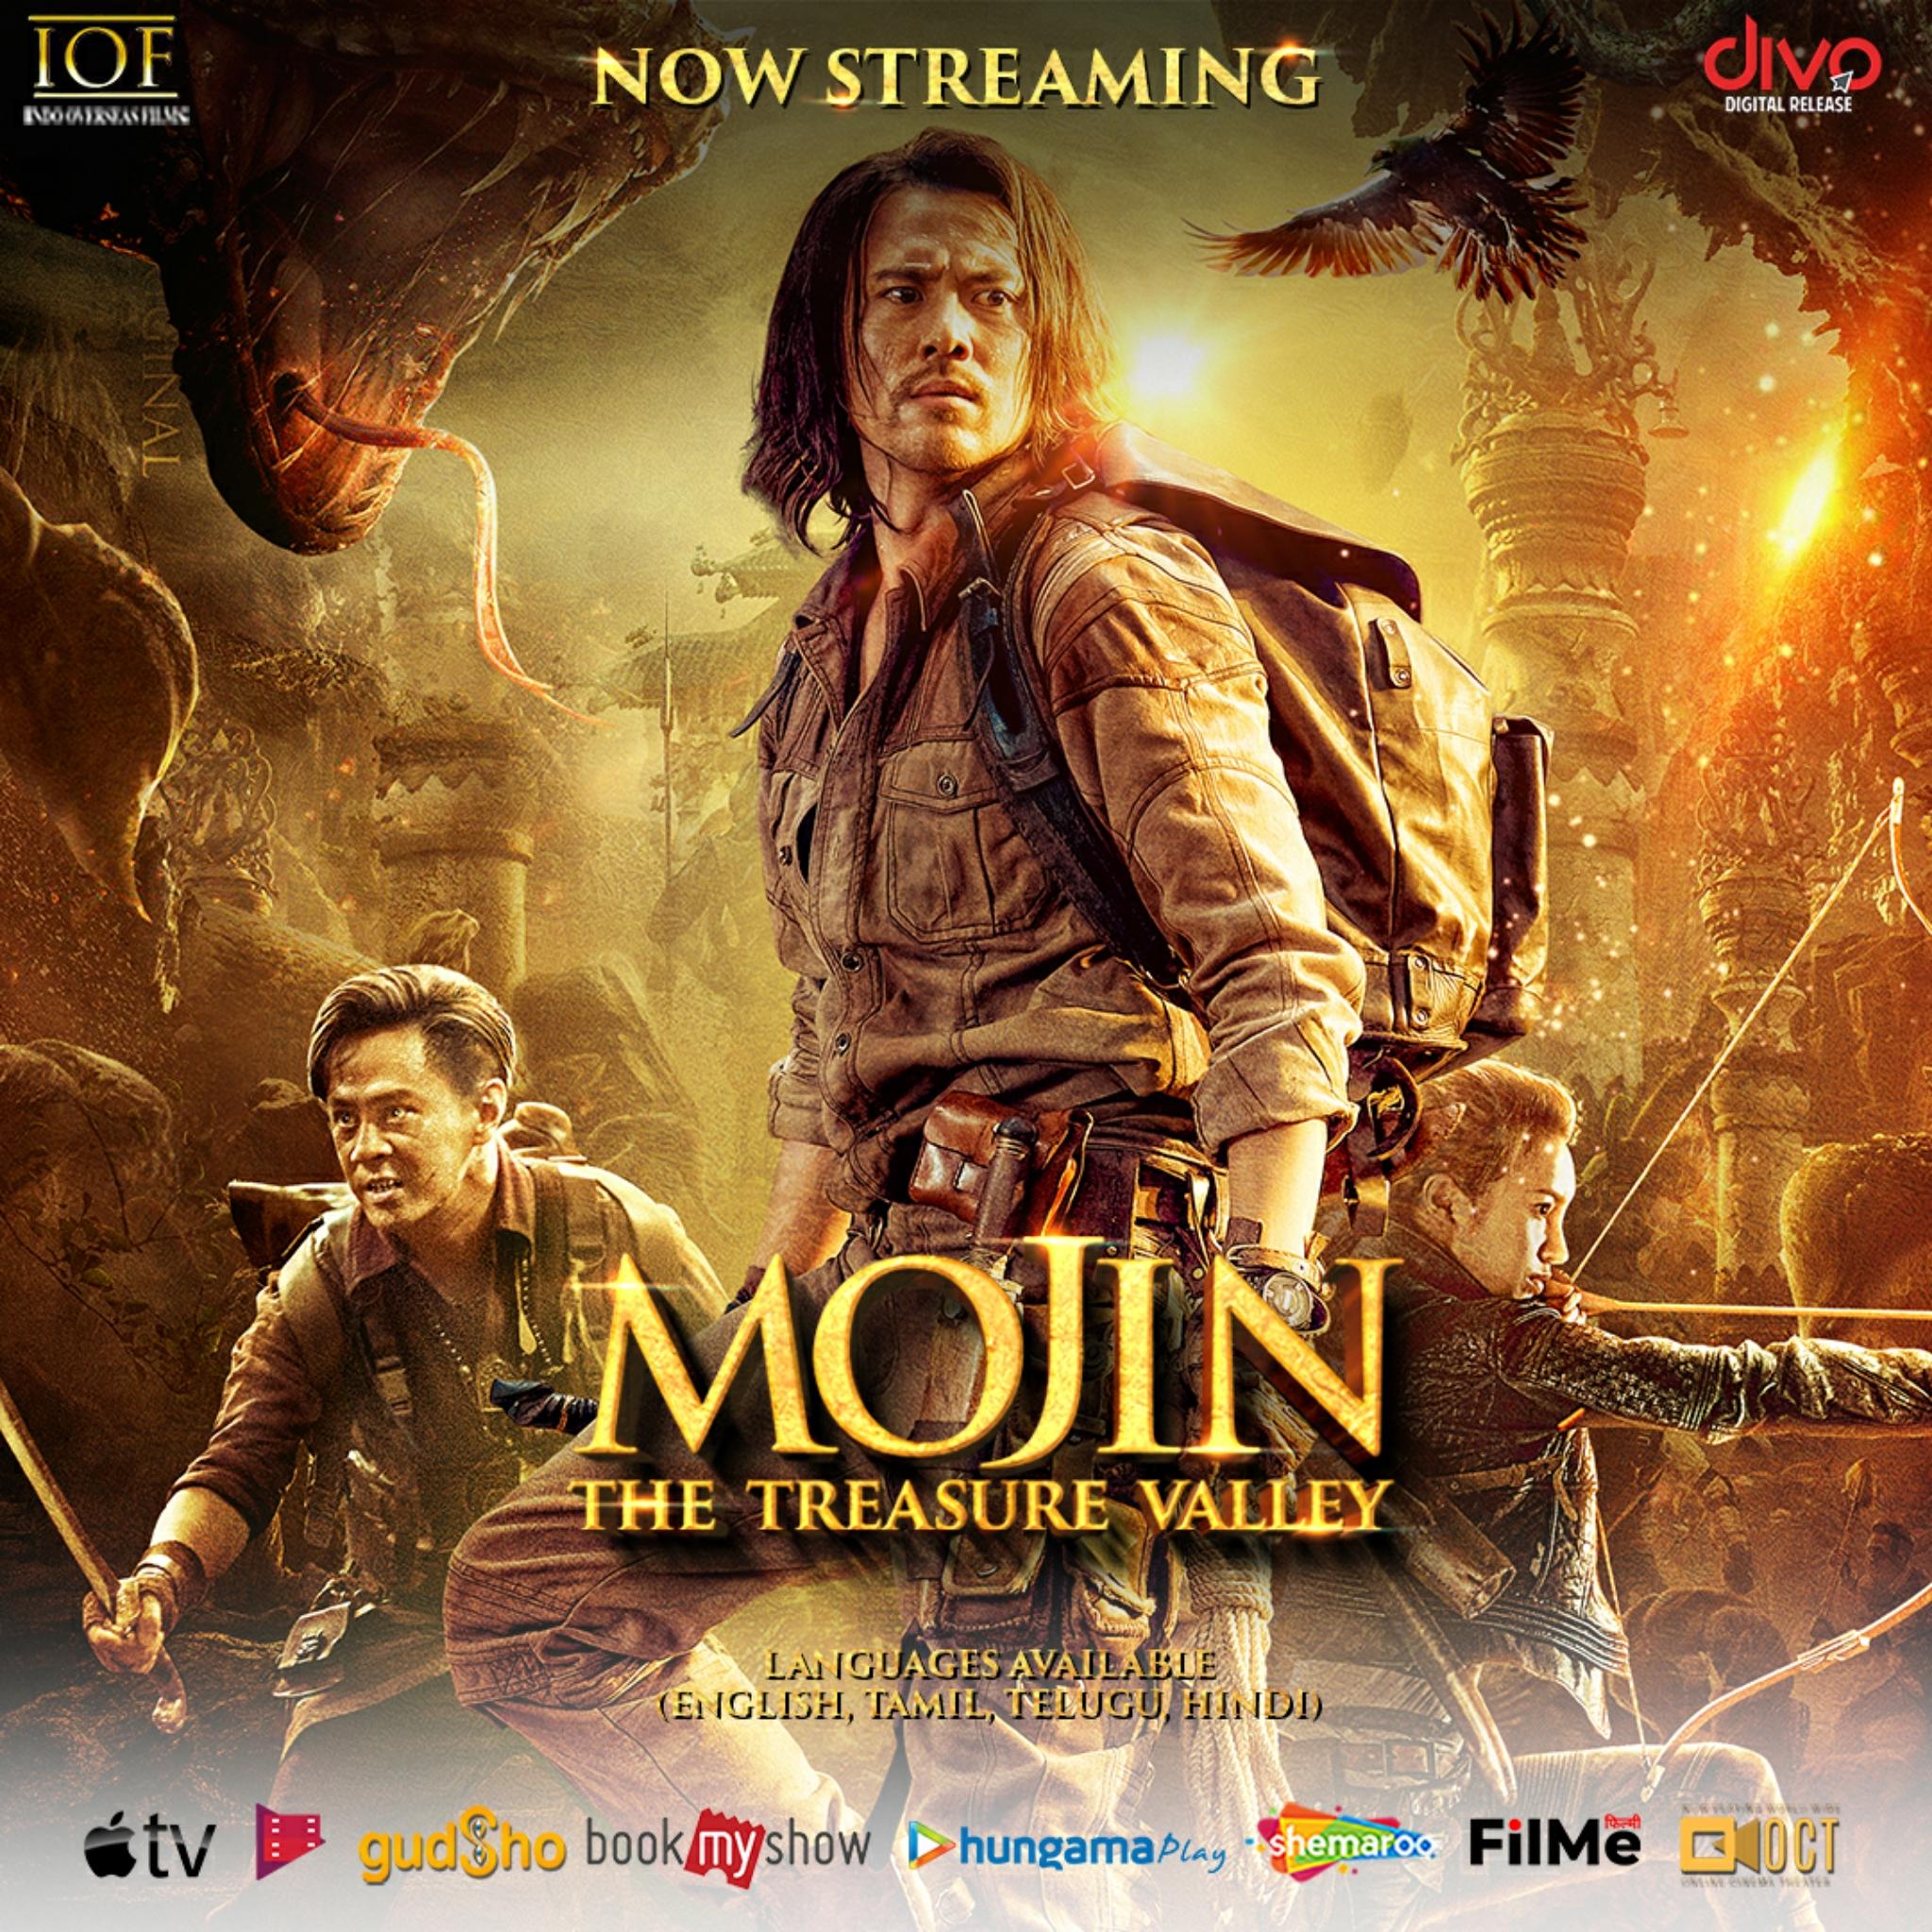 mojin the lost legend streaming